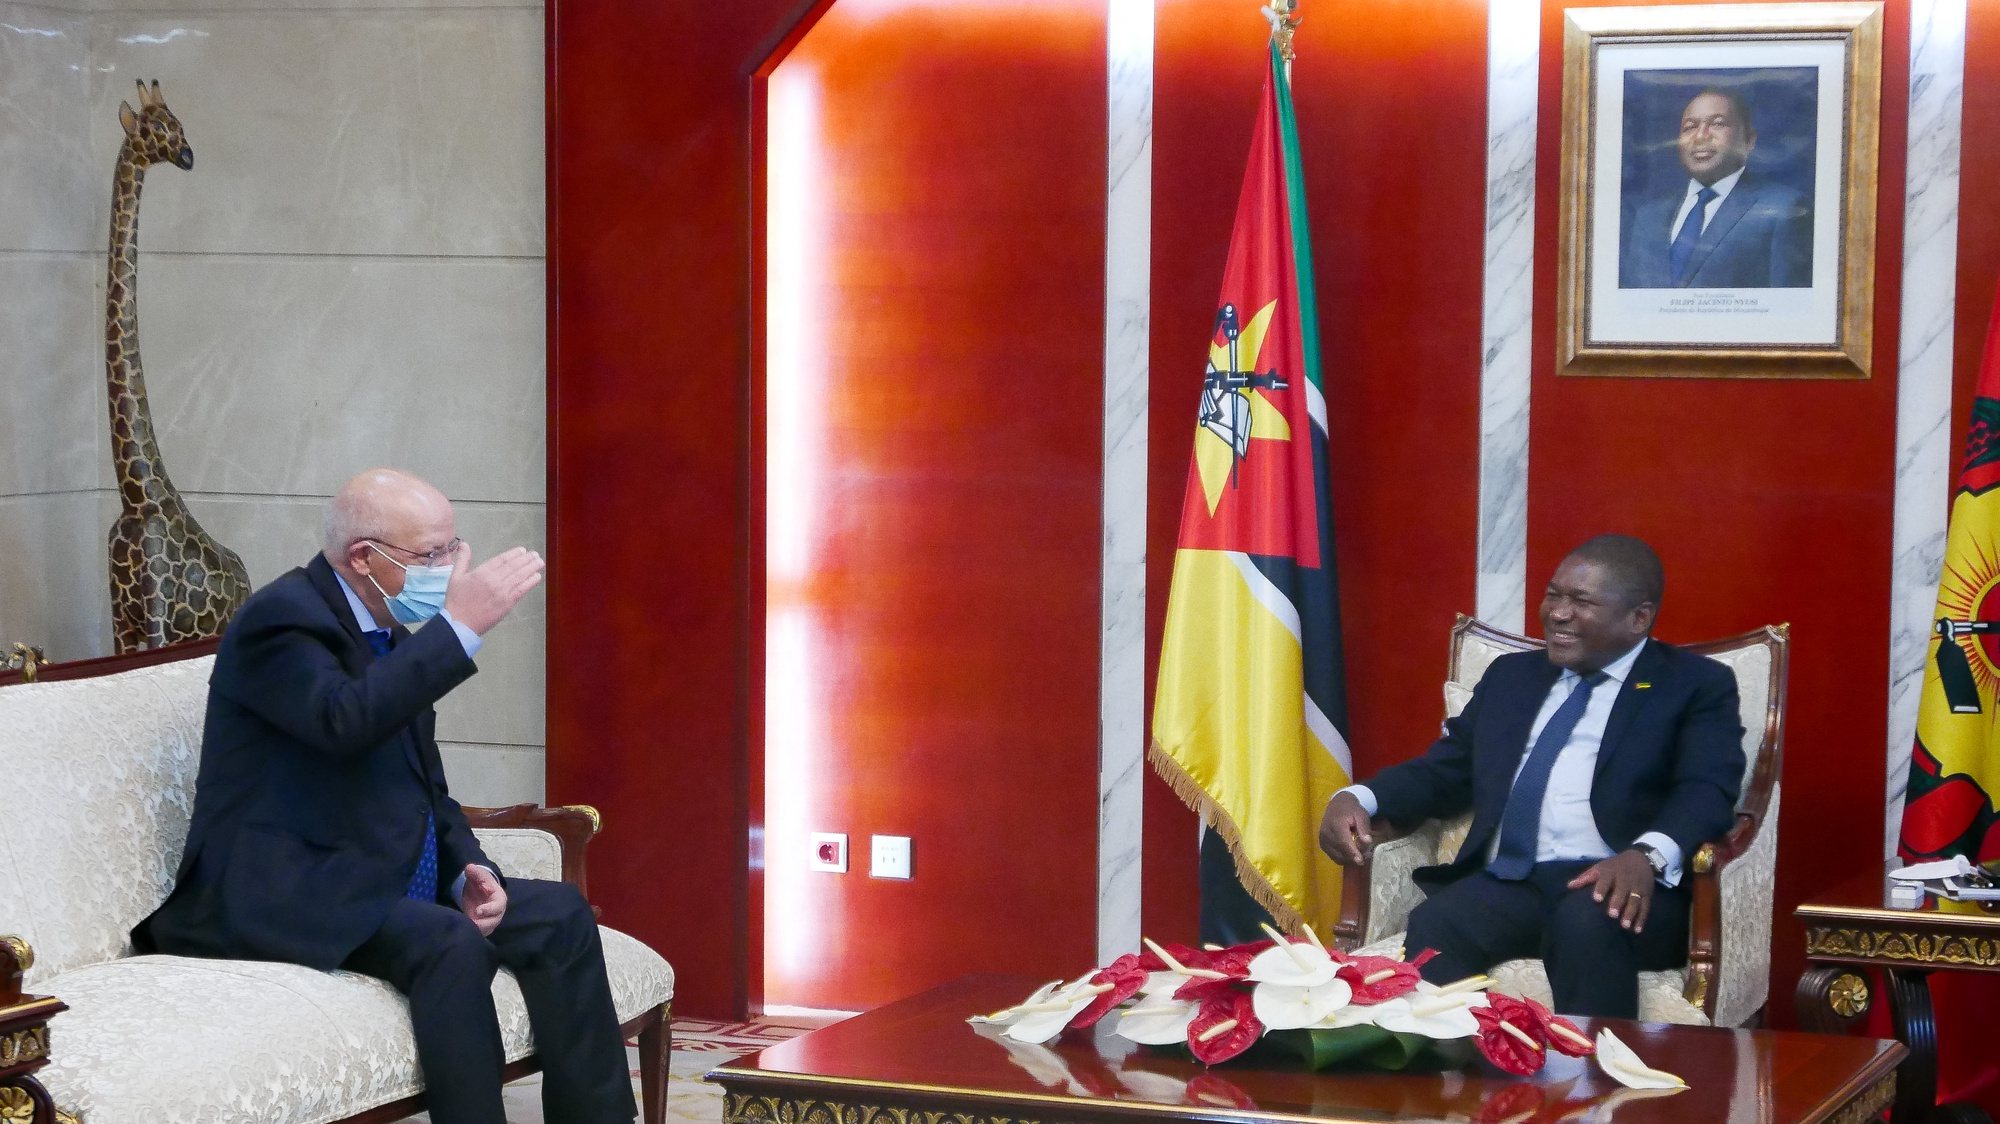 The Minister of State and Foreign Affairs and leader of a European Union mission Augusto Santos Silva (L) speaks with the President of the Republic of Mozambique Filipe Nyusi (R) during a meeting at the Presidential Palace in Maputo, Mozambique, 20 January 2021. LUIS MIGUEL FONSECA/LUSA